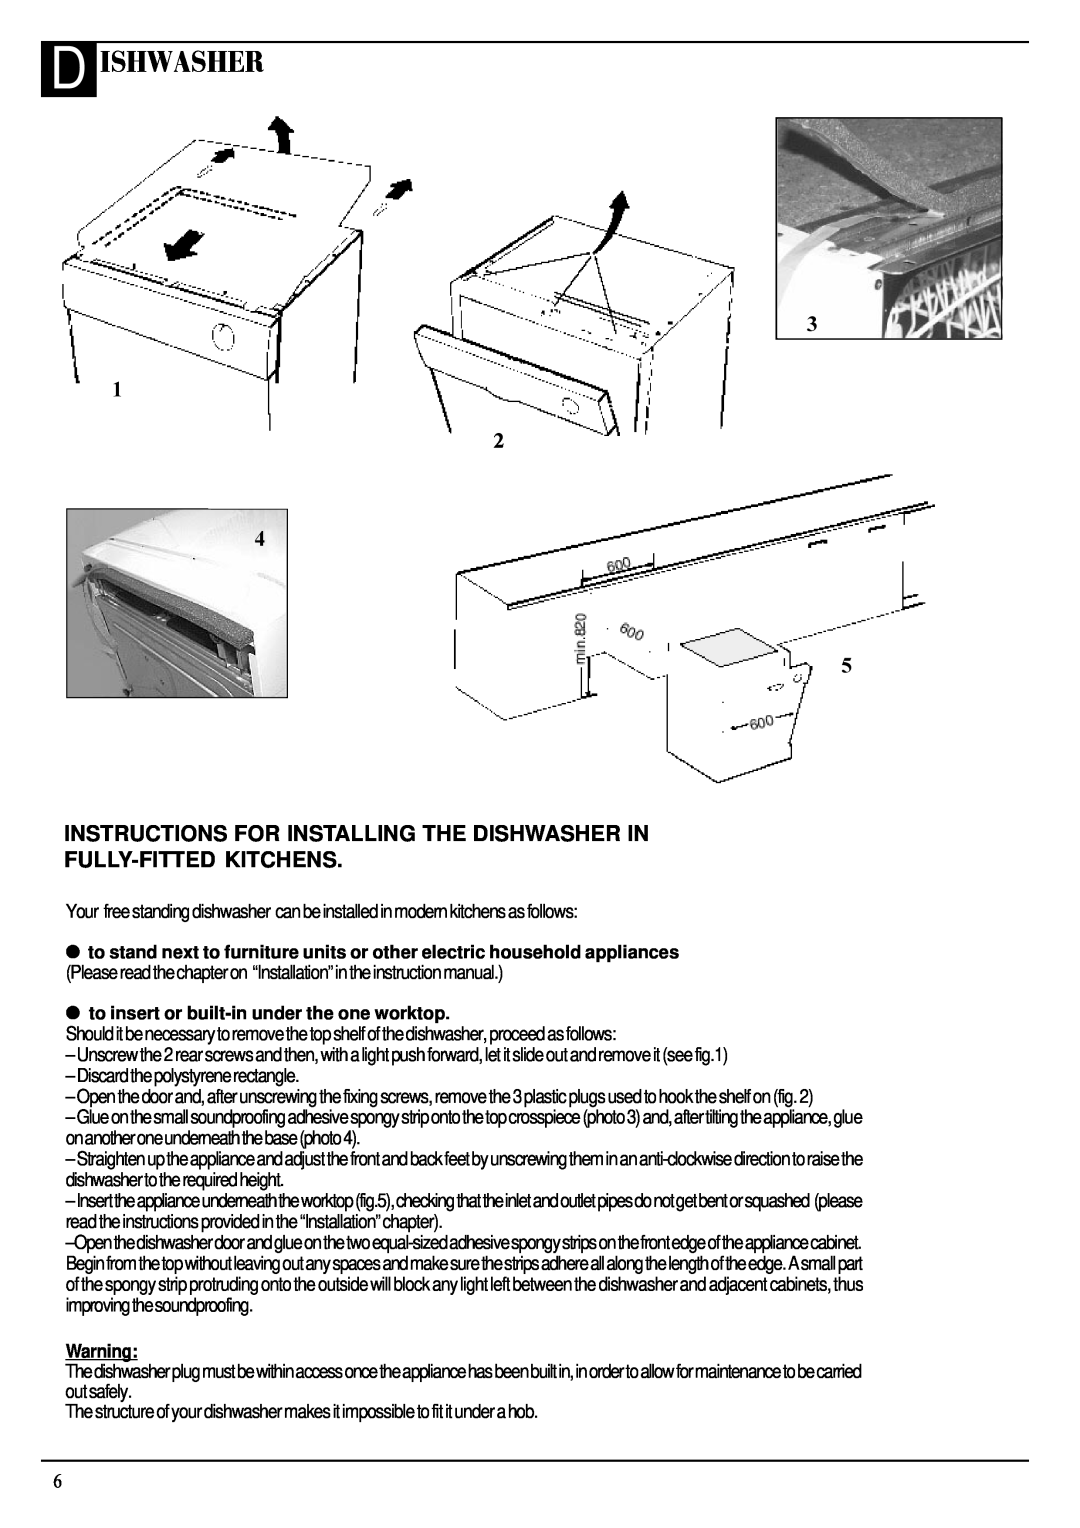 Hotpoint Aquarius FDW20 manual D Ishwasher, 3 1 2, Instructions For Installing The Dishwasher In, Fully-Fittedkitchens 